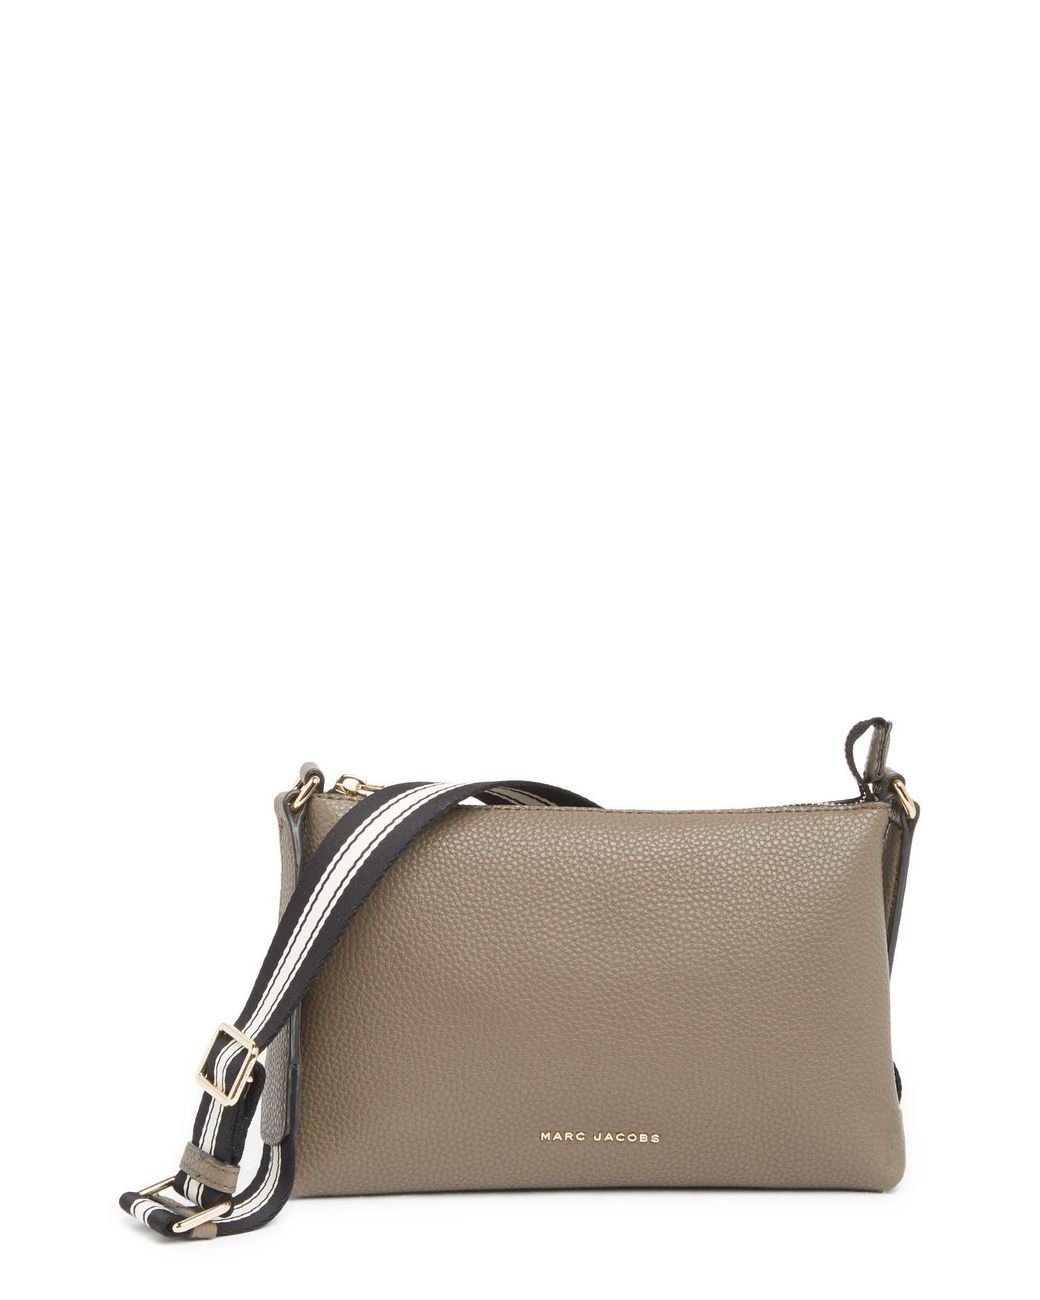 Marc Jacobs Authenticated Leather Handbag